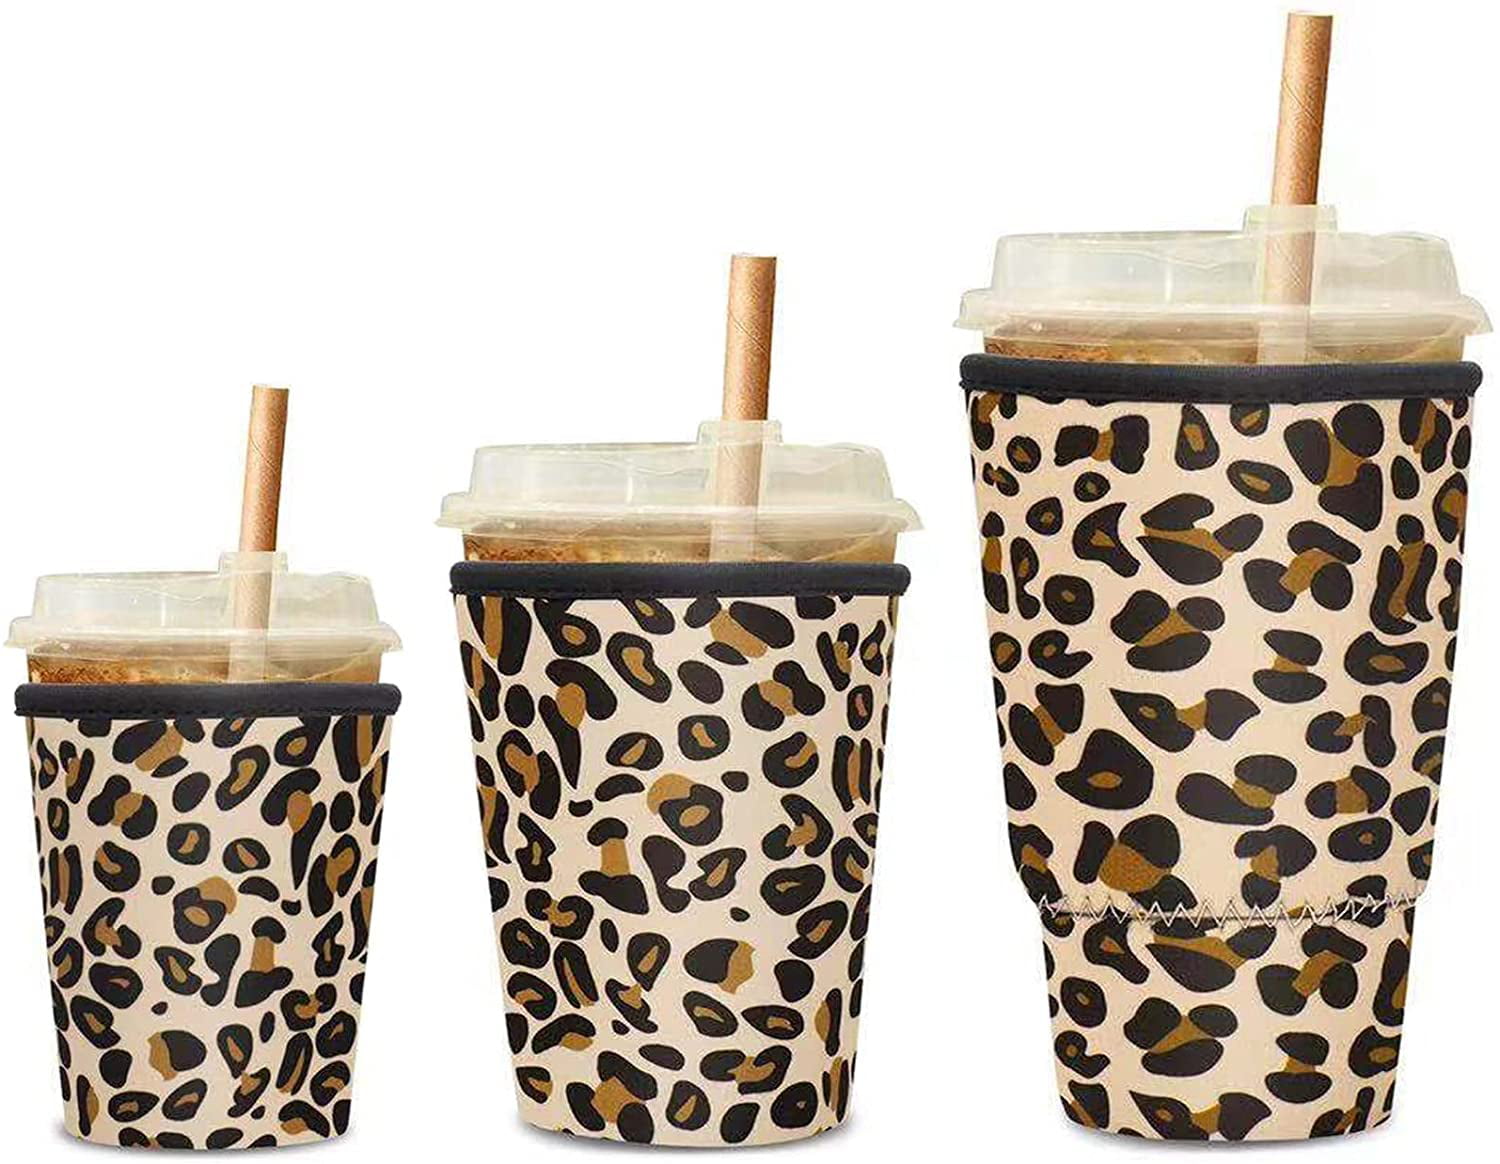 Neoprene Cup Holder Compatible with Starbucks Large MEETI Reusable Iced Coffee Cup Insulator Sleeve for Cold Beverages Leopard McDonald's Coffee Dunkin Donuts Tim Hortons and More